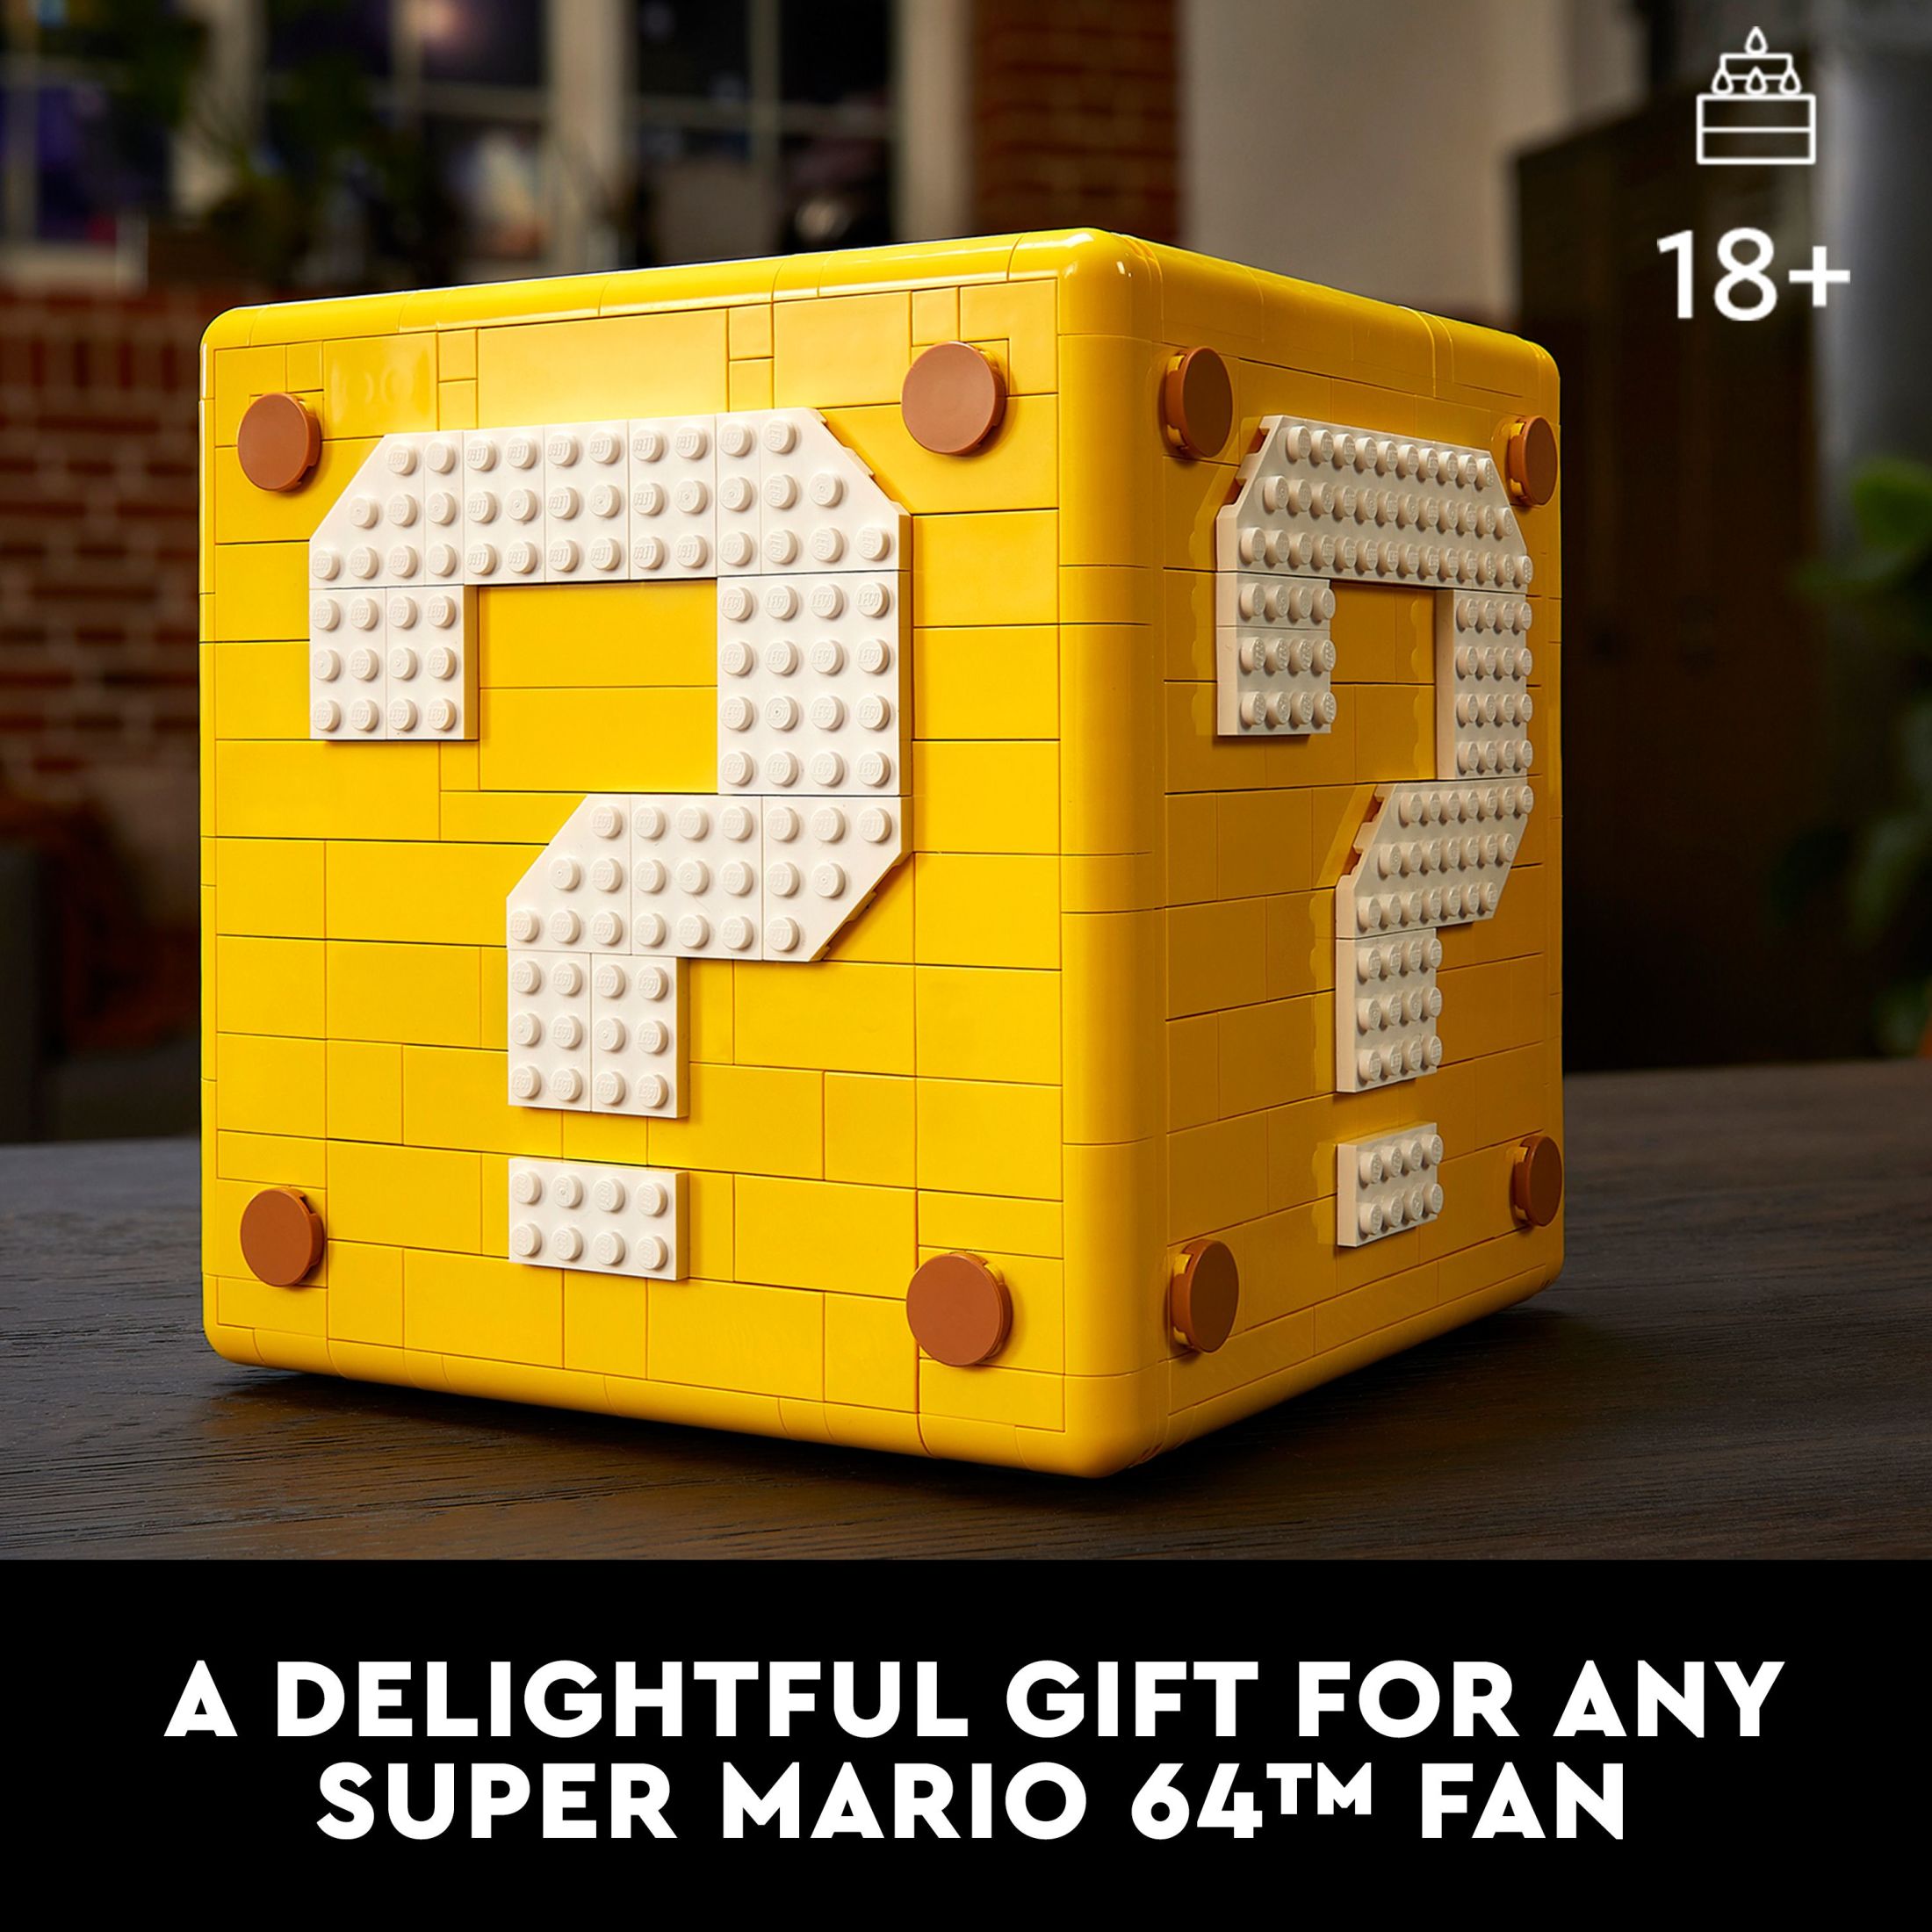 LEGO Super Mario 64 Question Mark Block 71395, 3D Model Set for Adults with Microscale Levels and Princess Peach & Yoshi Micro Figures - image 5 of 9